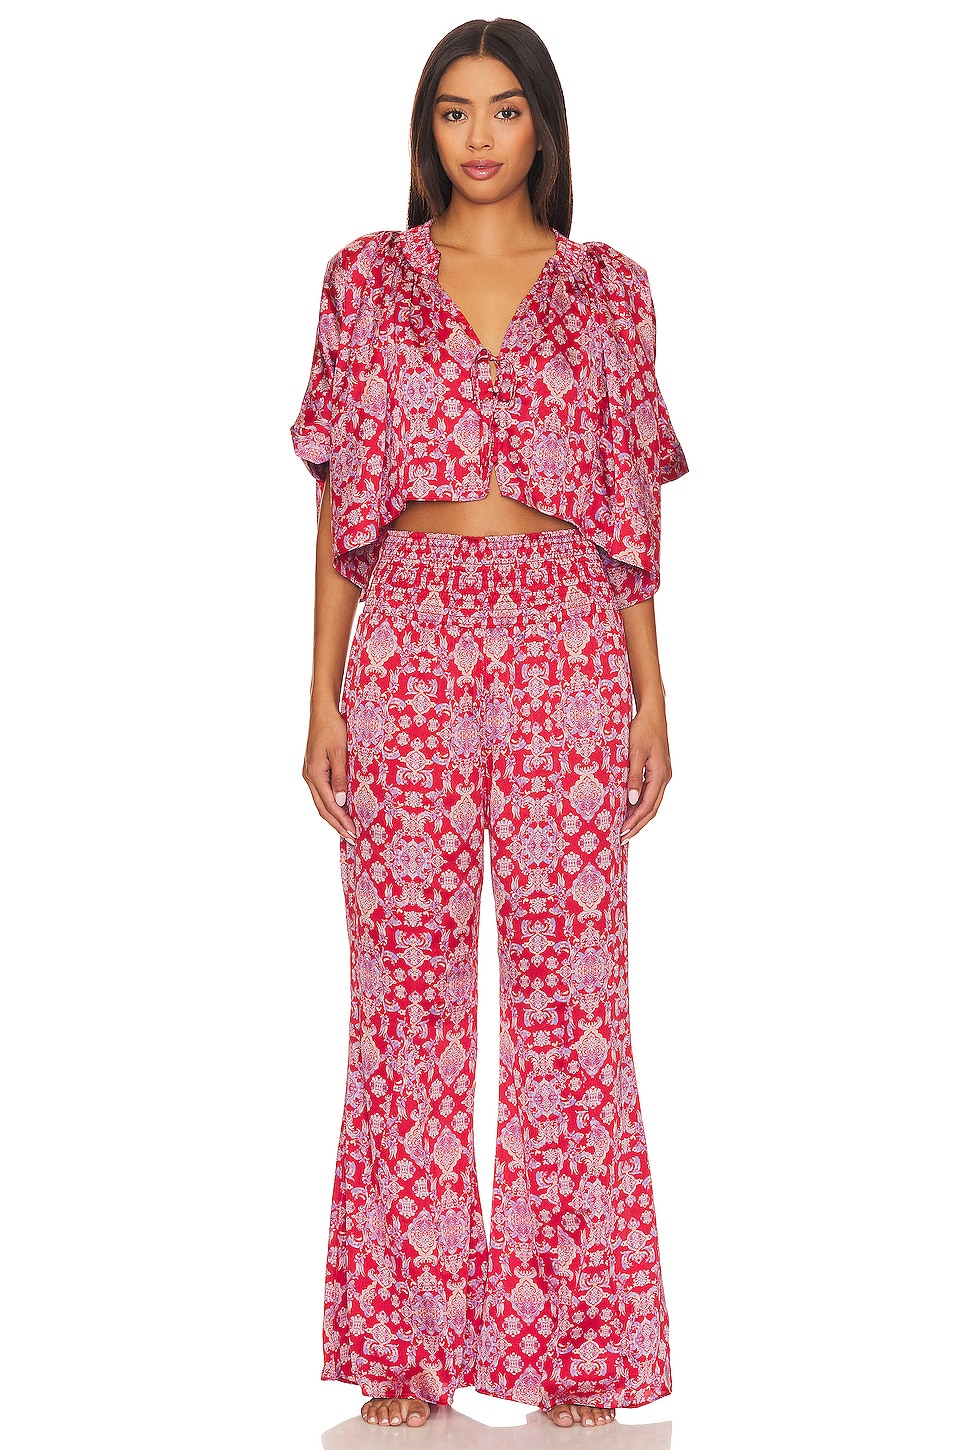 Free People x Intimately FP Misty Mornings Sleep Set In Red Combo in Red  Combo